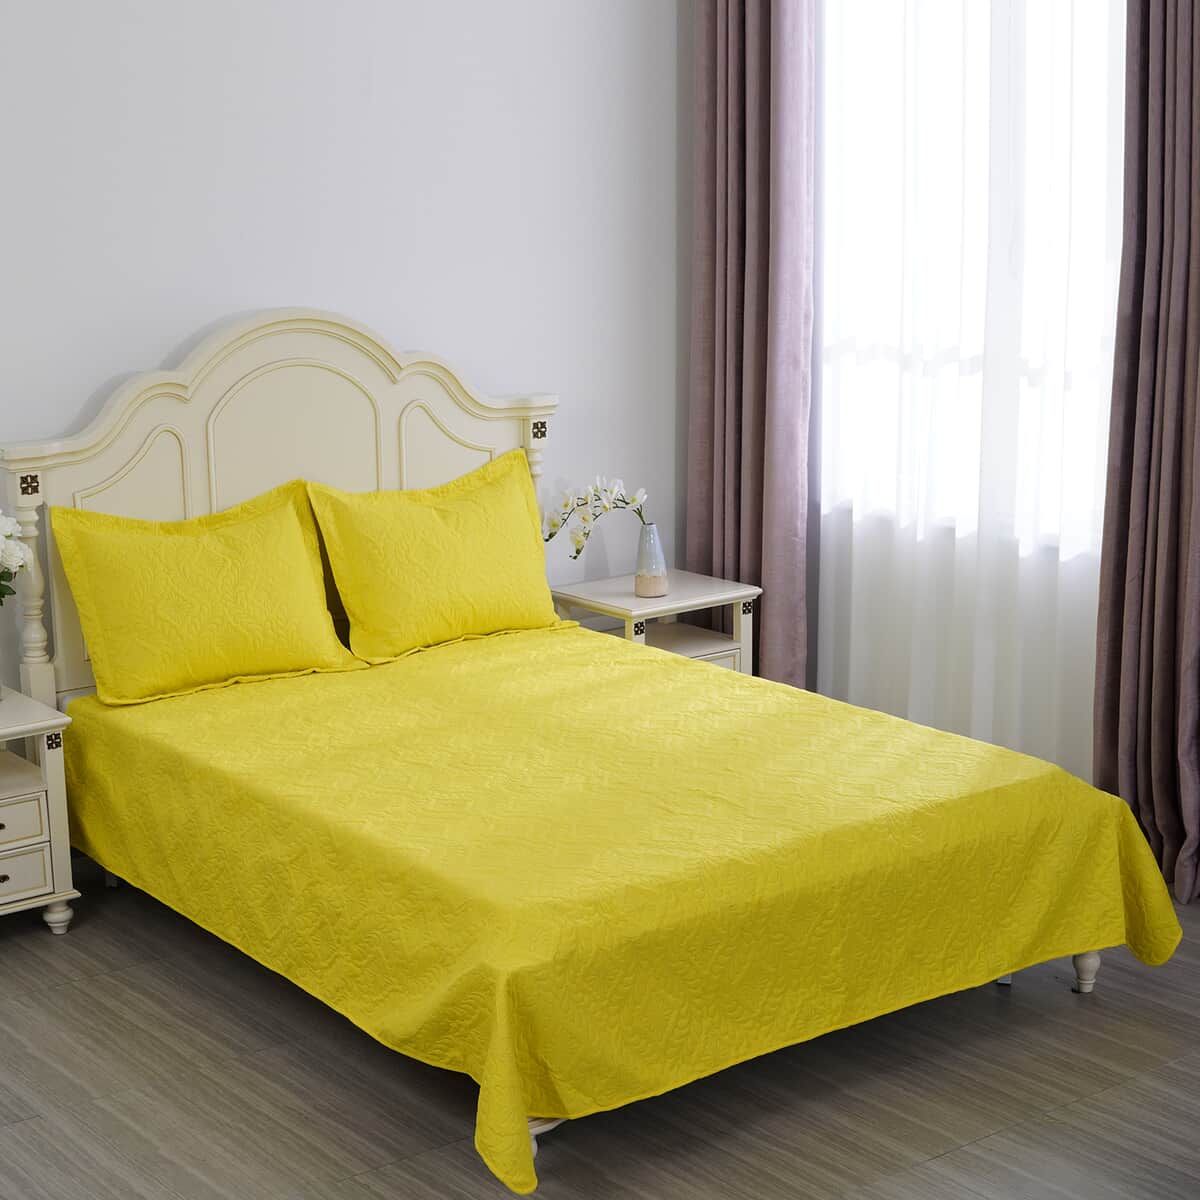 Homesmart 3 Pcs Solid Yellow Pinsonic Quilt Bedding Set - Queen Size image number 0